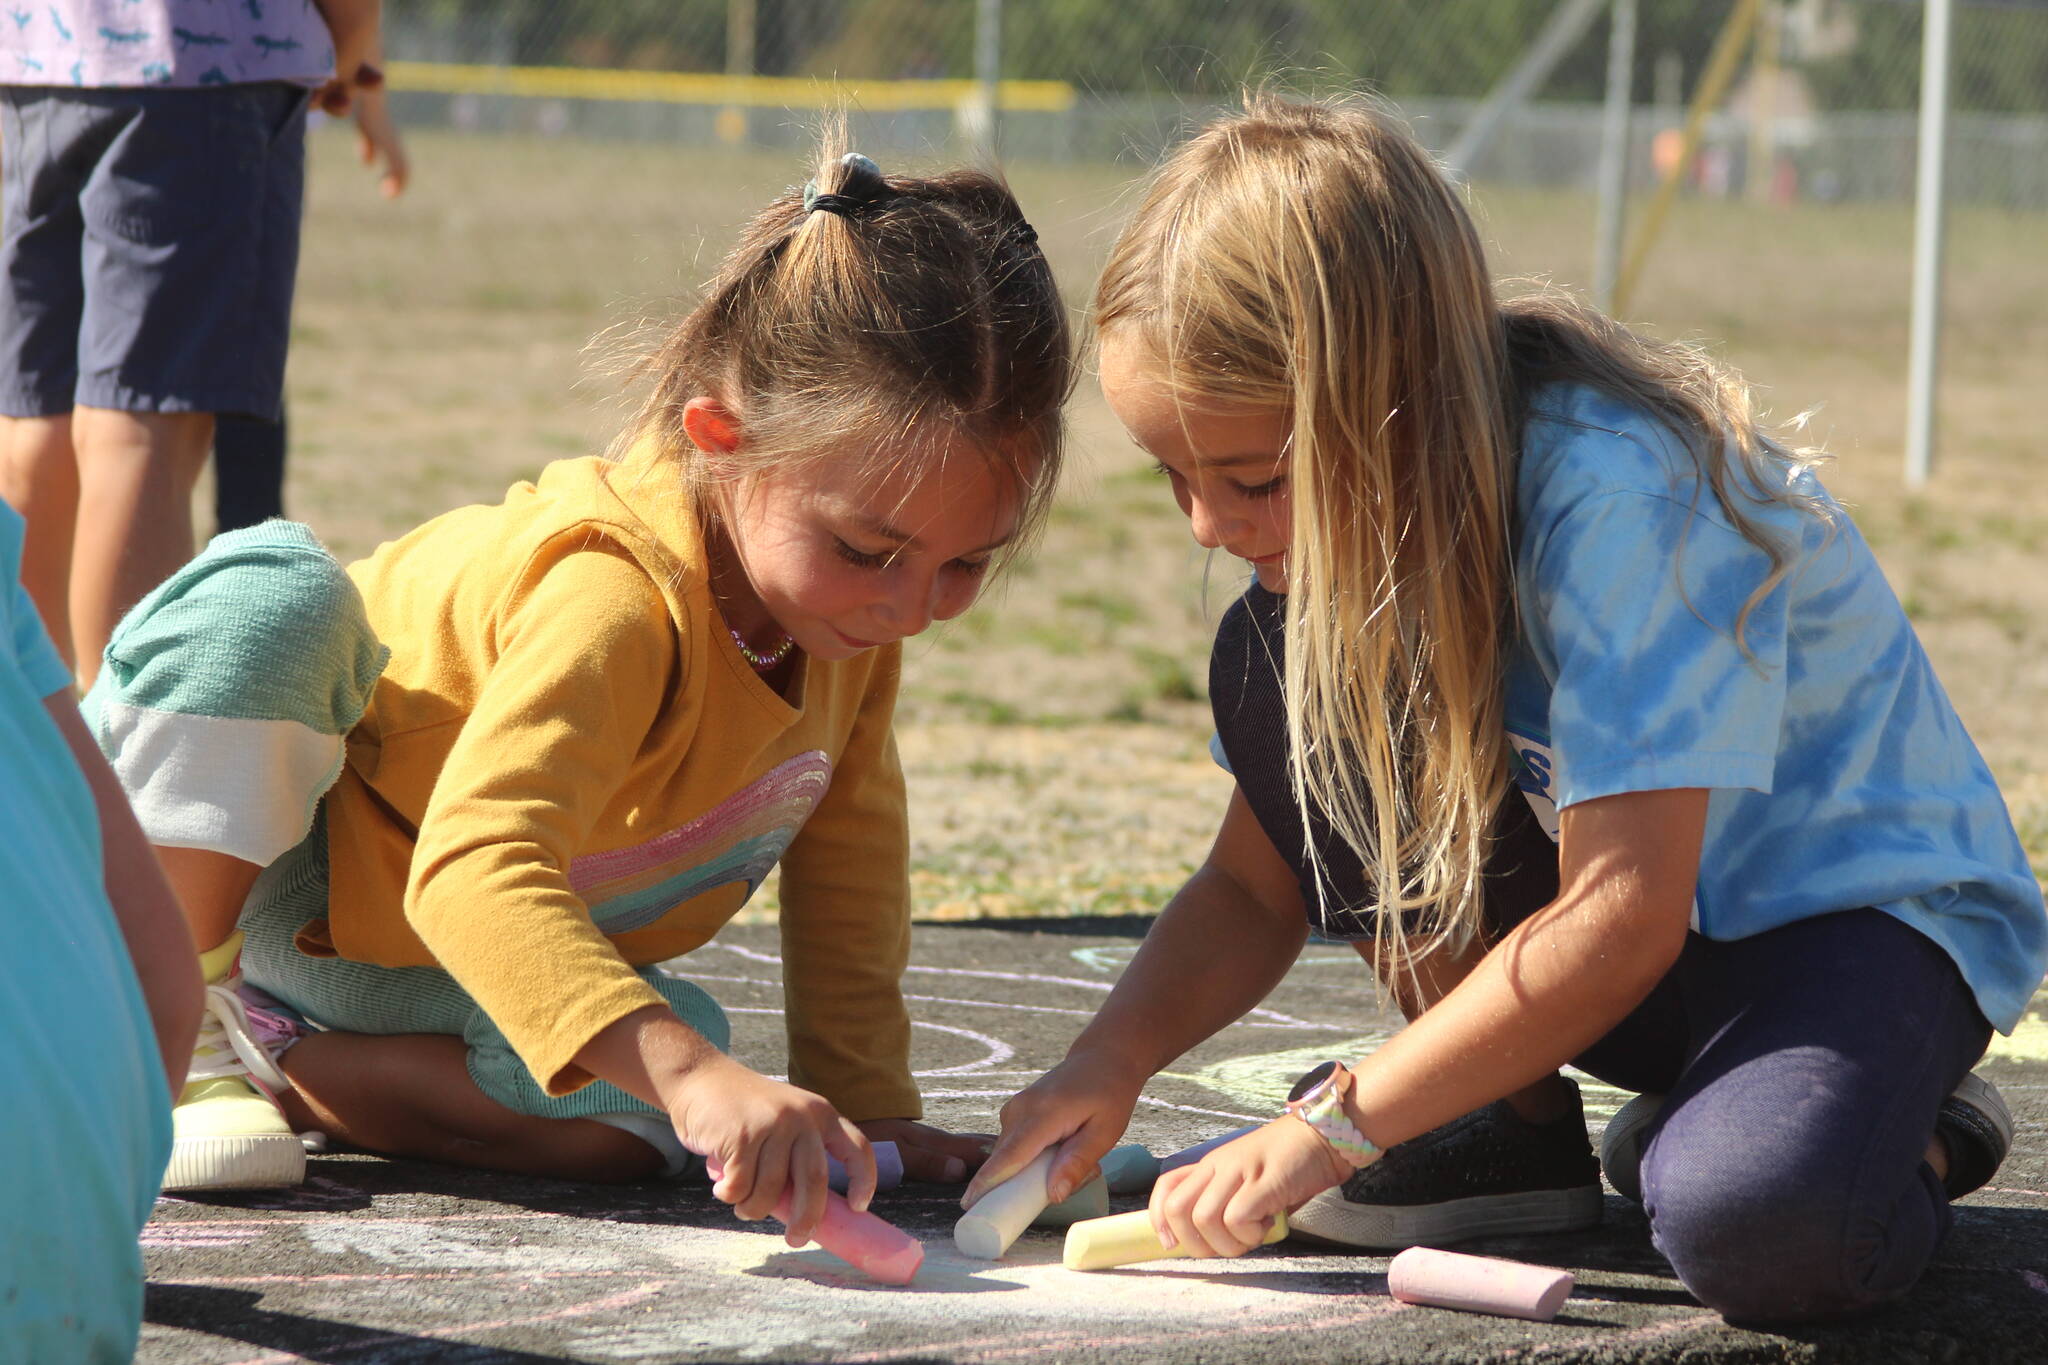 Photo by Karina Andrew/Whidbey News-Times
First graders Isla Stewart, left, and Millie Kindred help “chalk the walk” Sept. 15 at Hillcrest Elementary School.